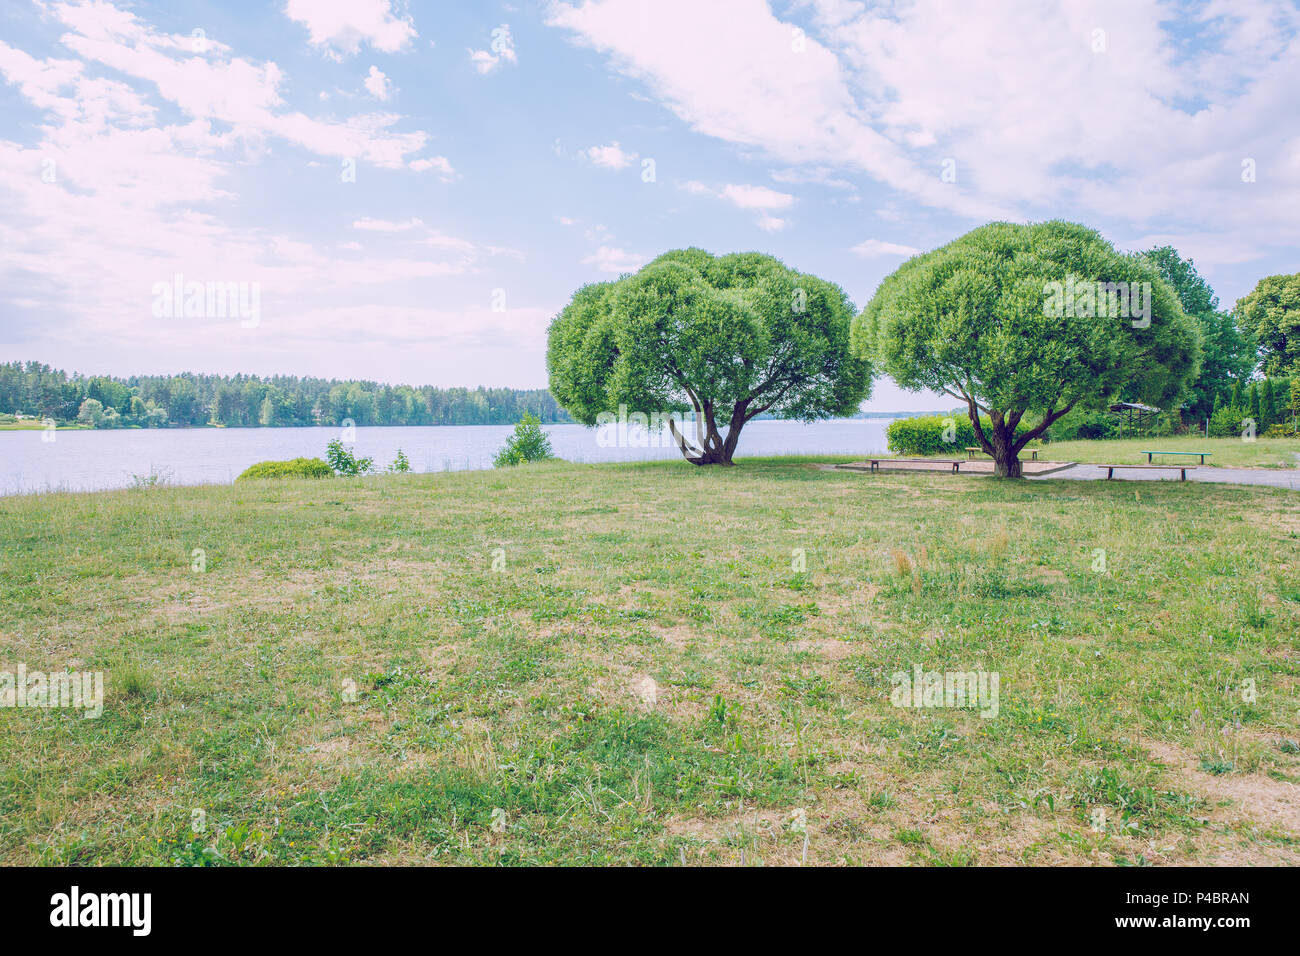 City Ogre, Latvia. Two trees, river and blue sky. Nature and sunny day. Travel photo 2018. Stock Photo